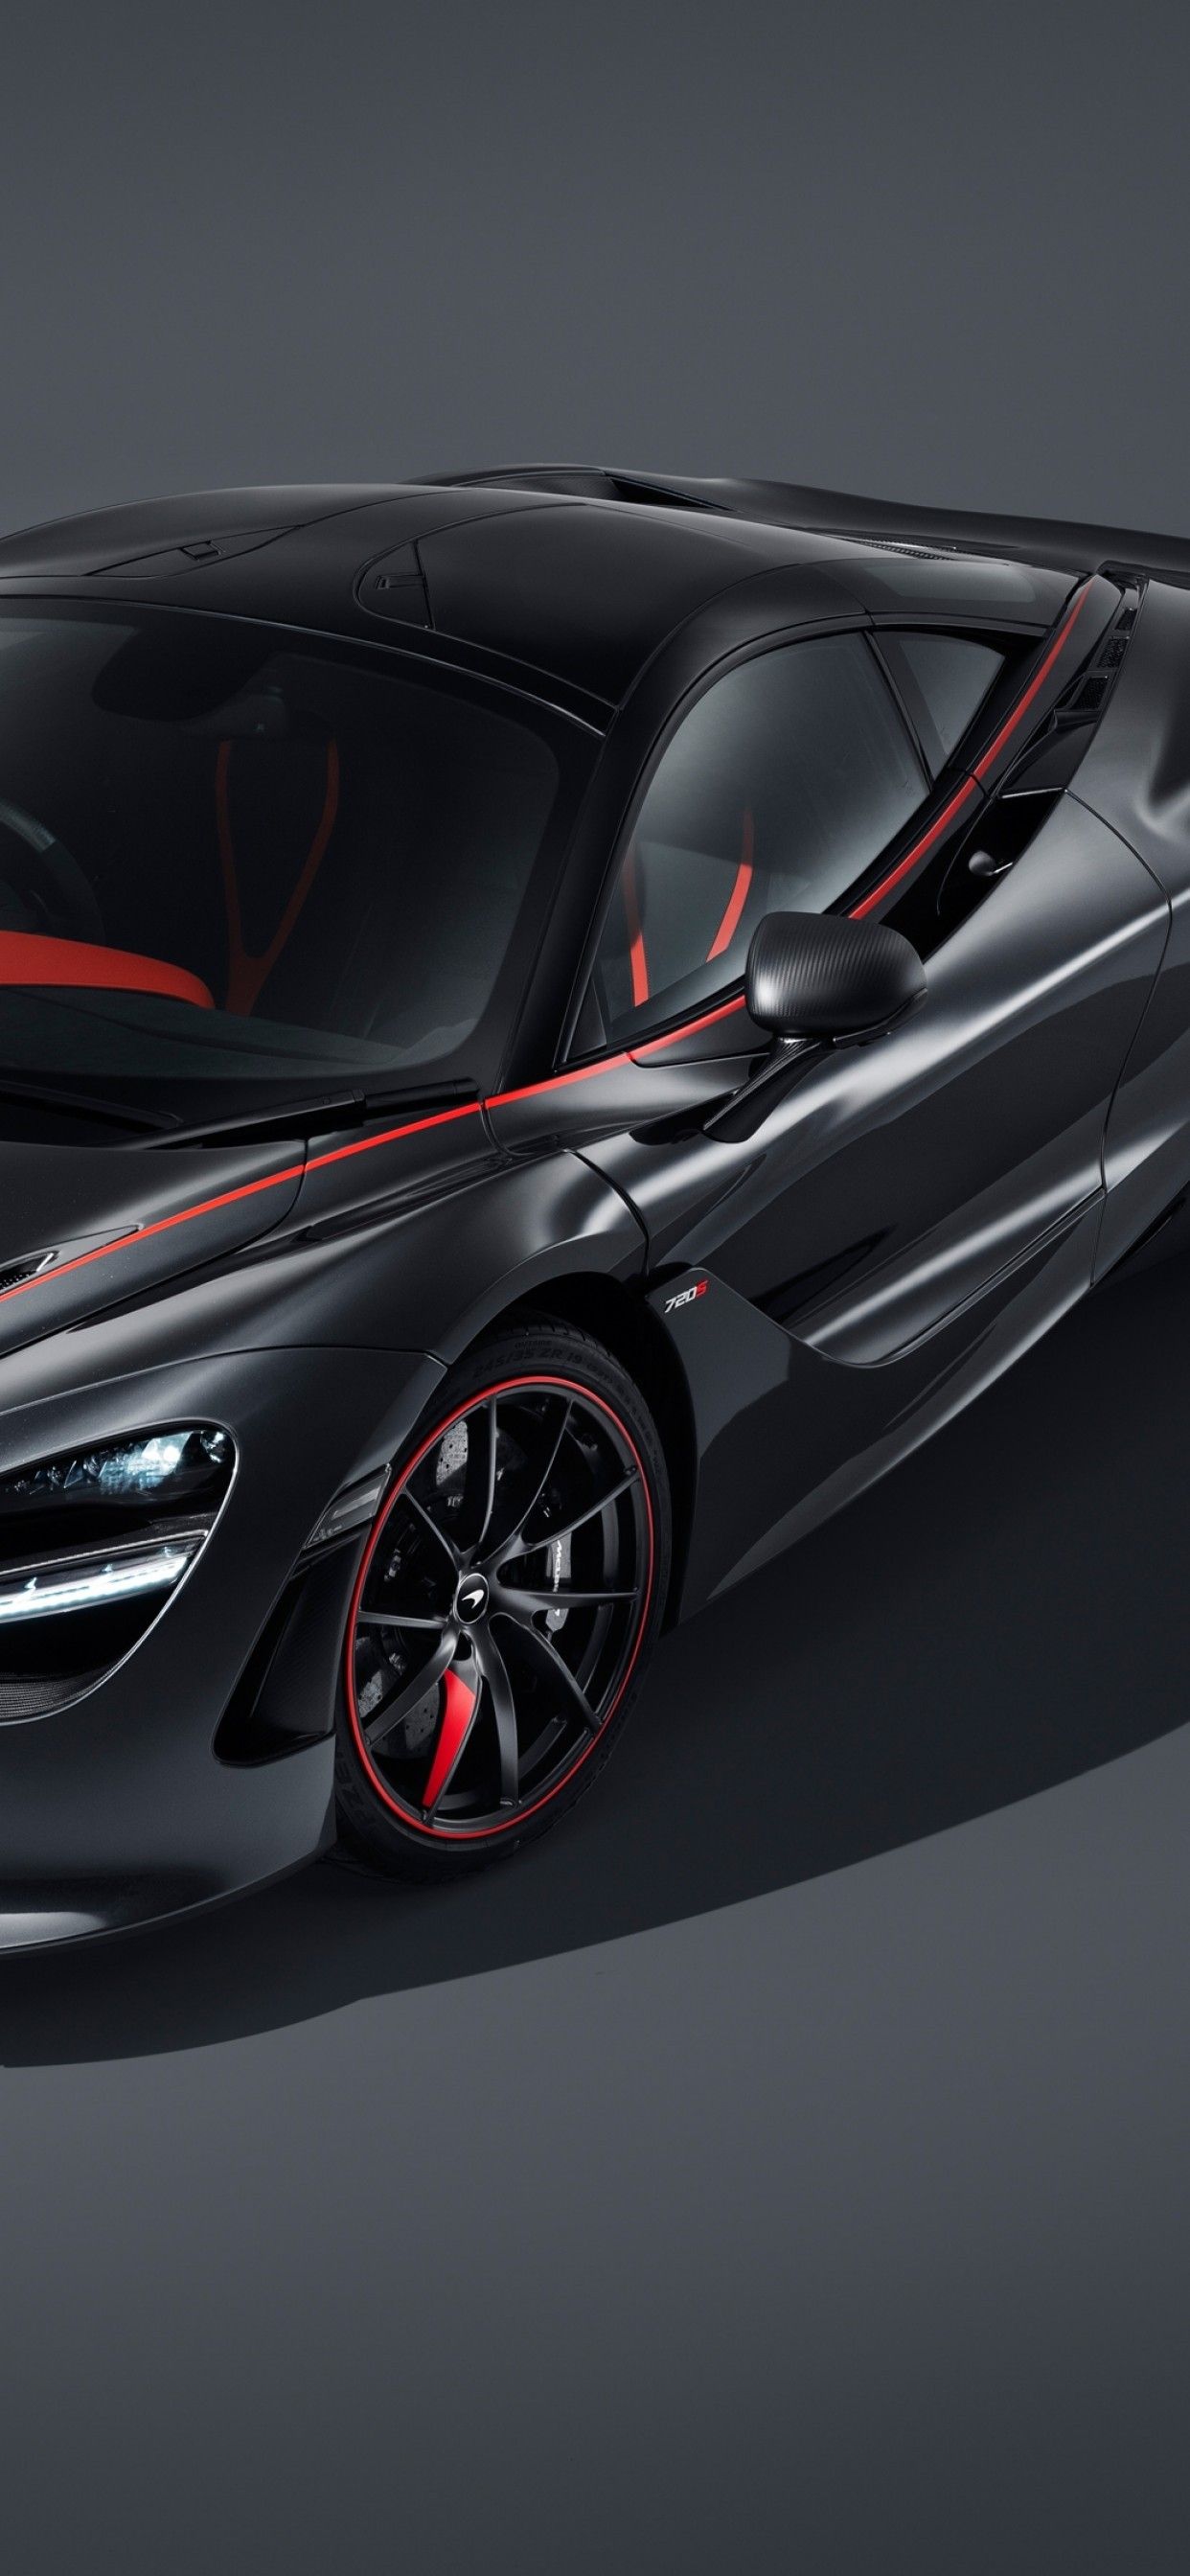 Download 1242x2688 Mclaren 720s Stealth, Black And Red Concept, Supercars Wallpaper for iPhone XS Max